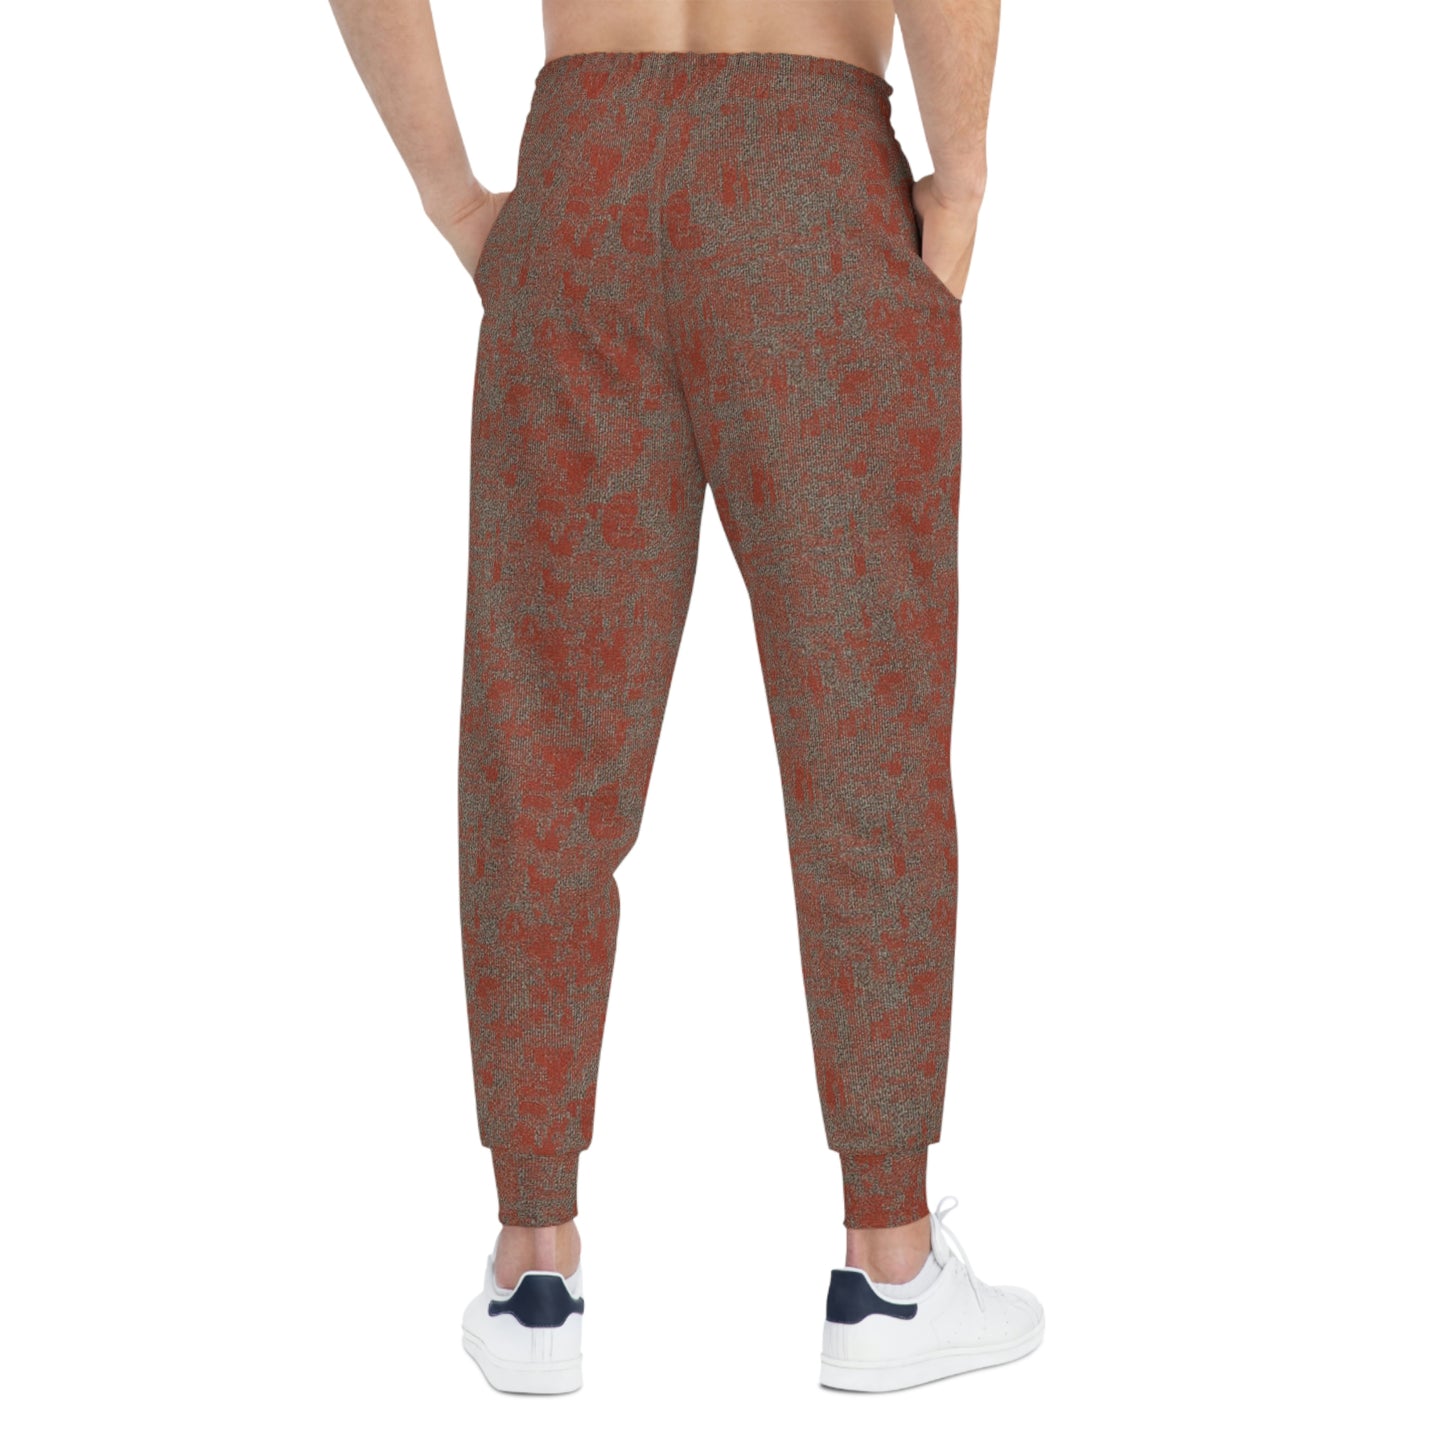 Still get paid Apparel Athletic Joggers